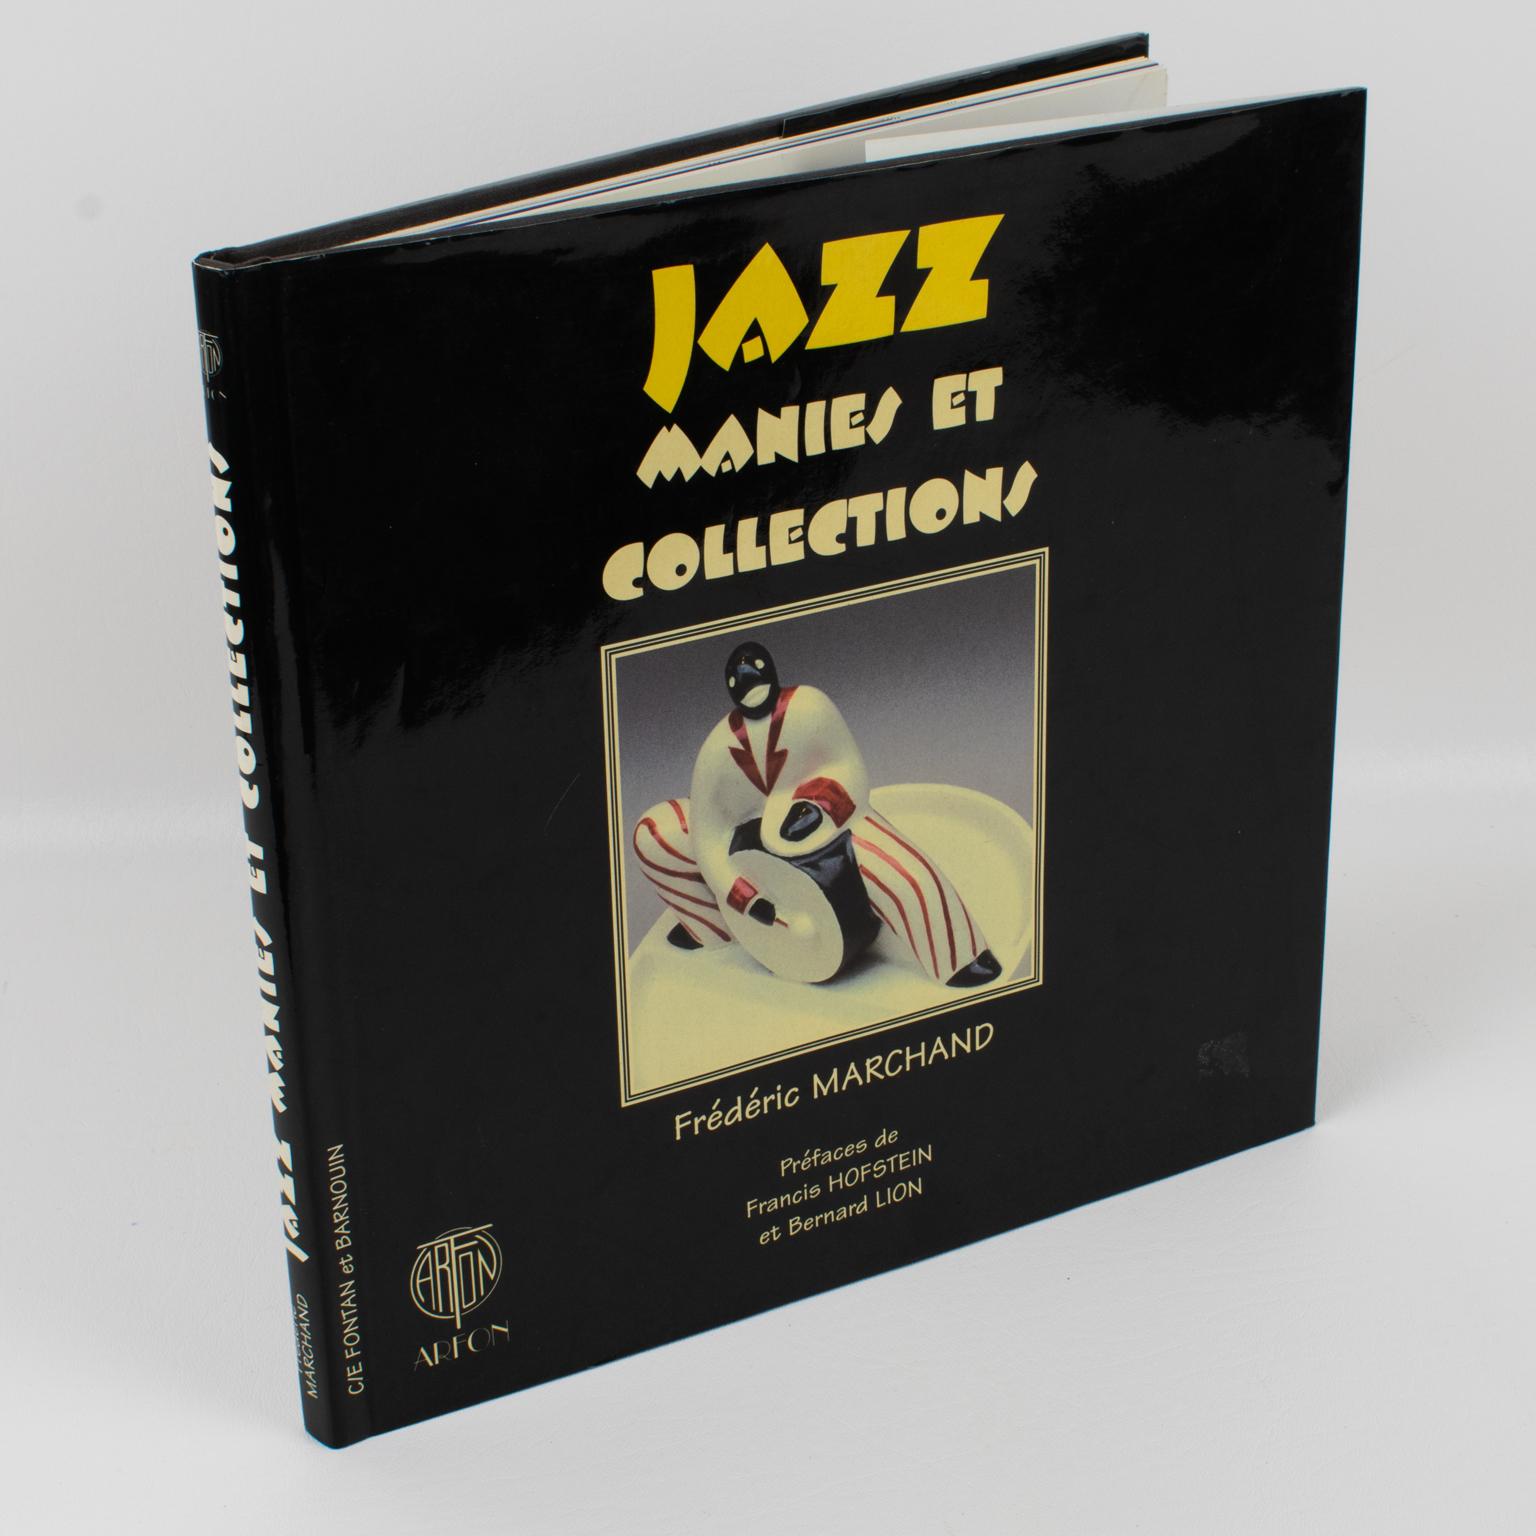 Jazz Manies et Collections (Jazz Mania and Collections), French Book by Frédéric Marchand, 1997.
Preface by Francis Hofstein and Bernard Lion.
The author has collected 180 objects on the vibrant theme of jazz: books, magazines, programs, record